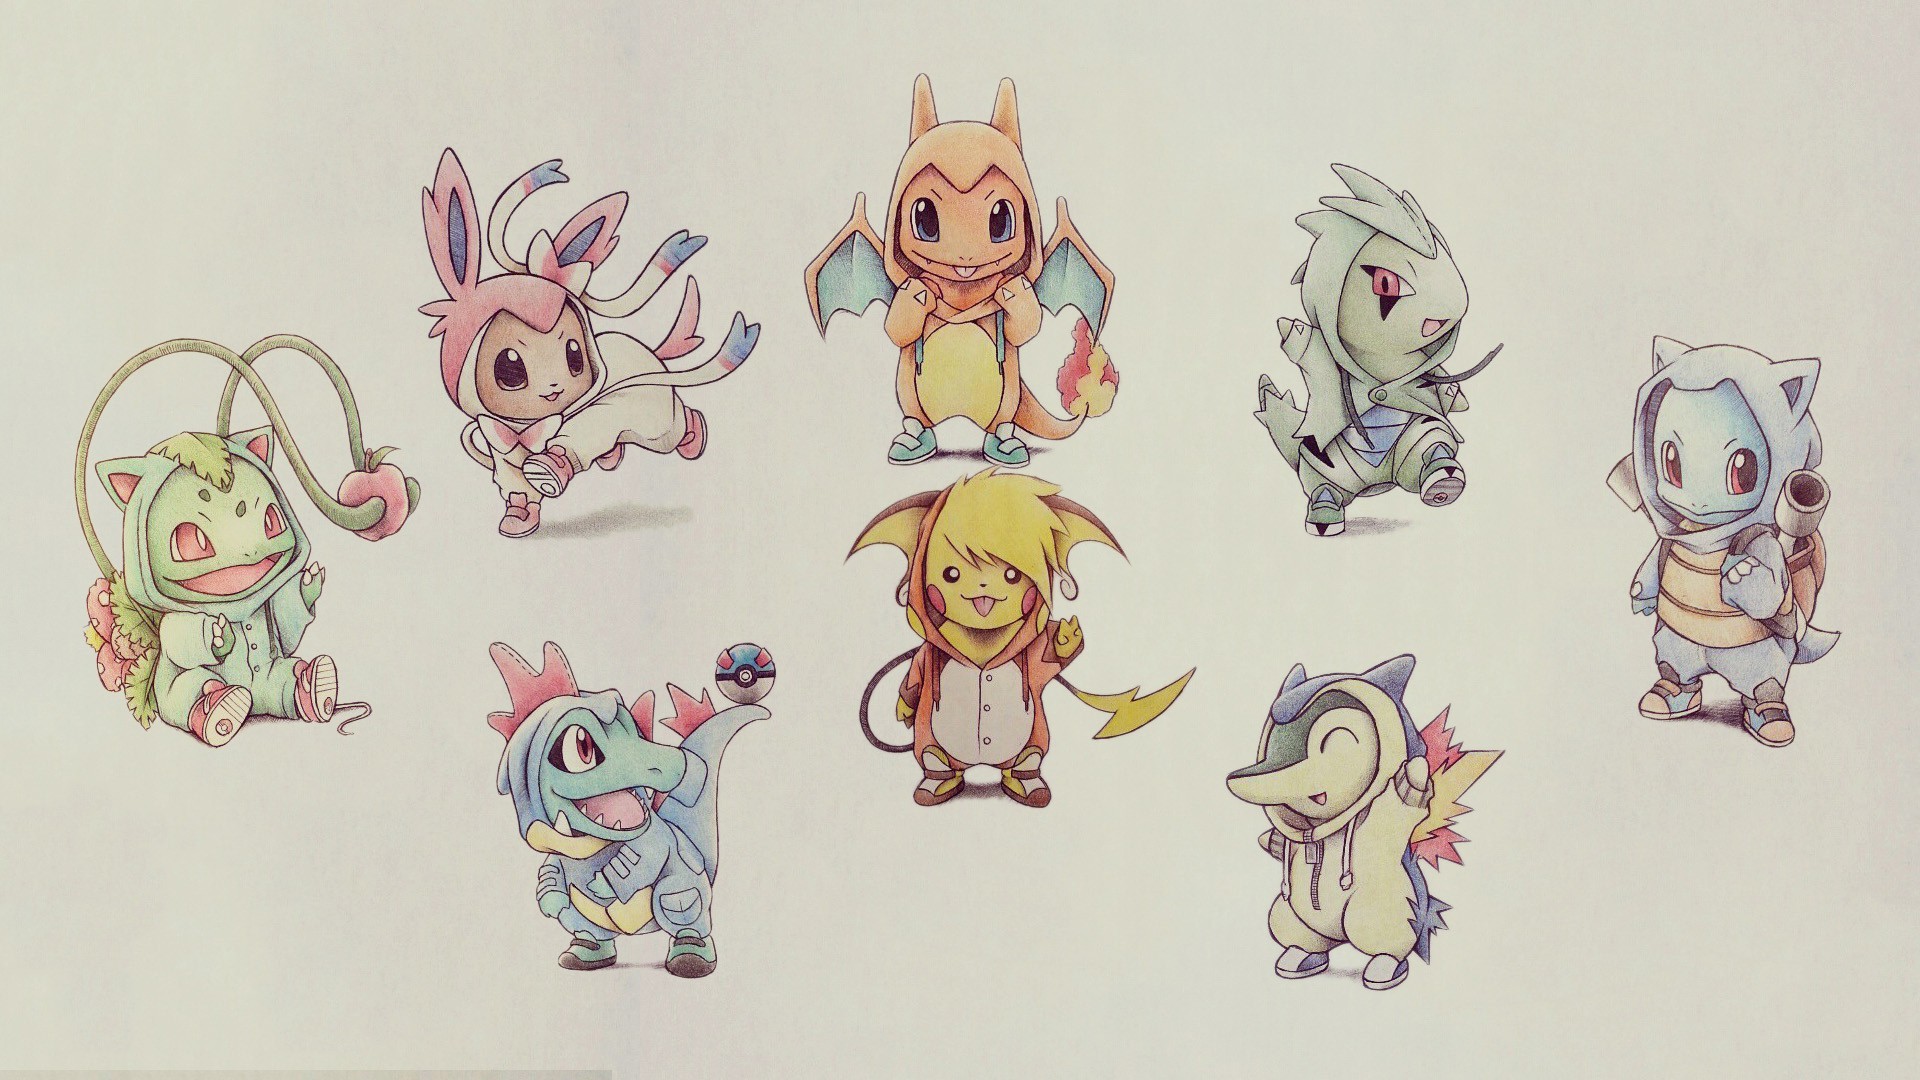 Wallpaper of basic Pokemon wearing costumes of their evolutions